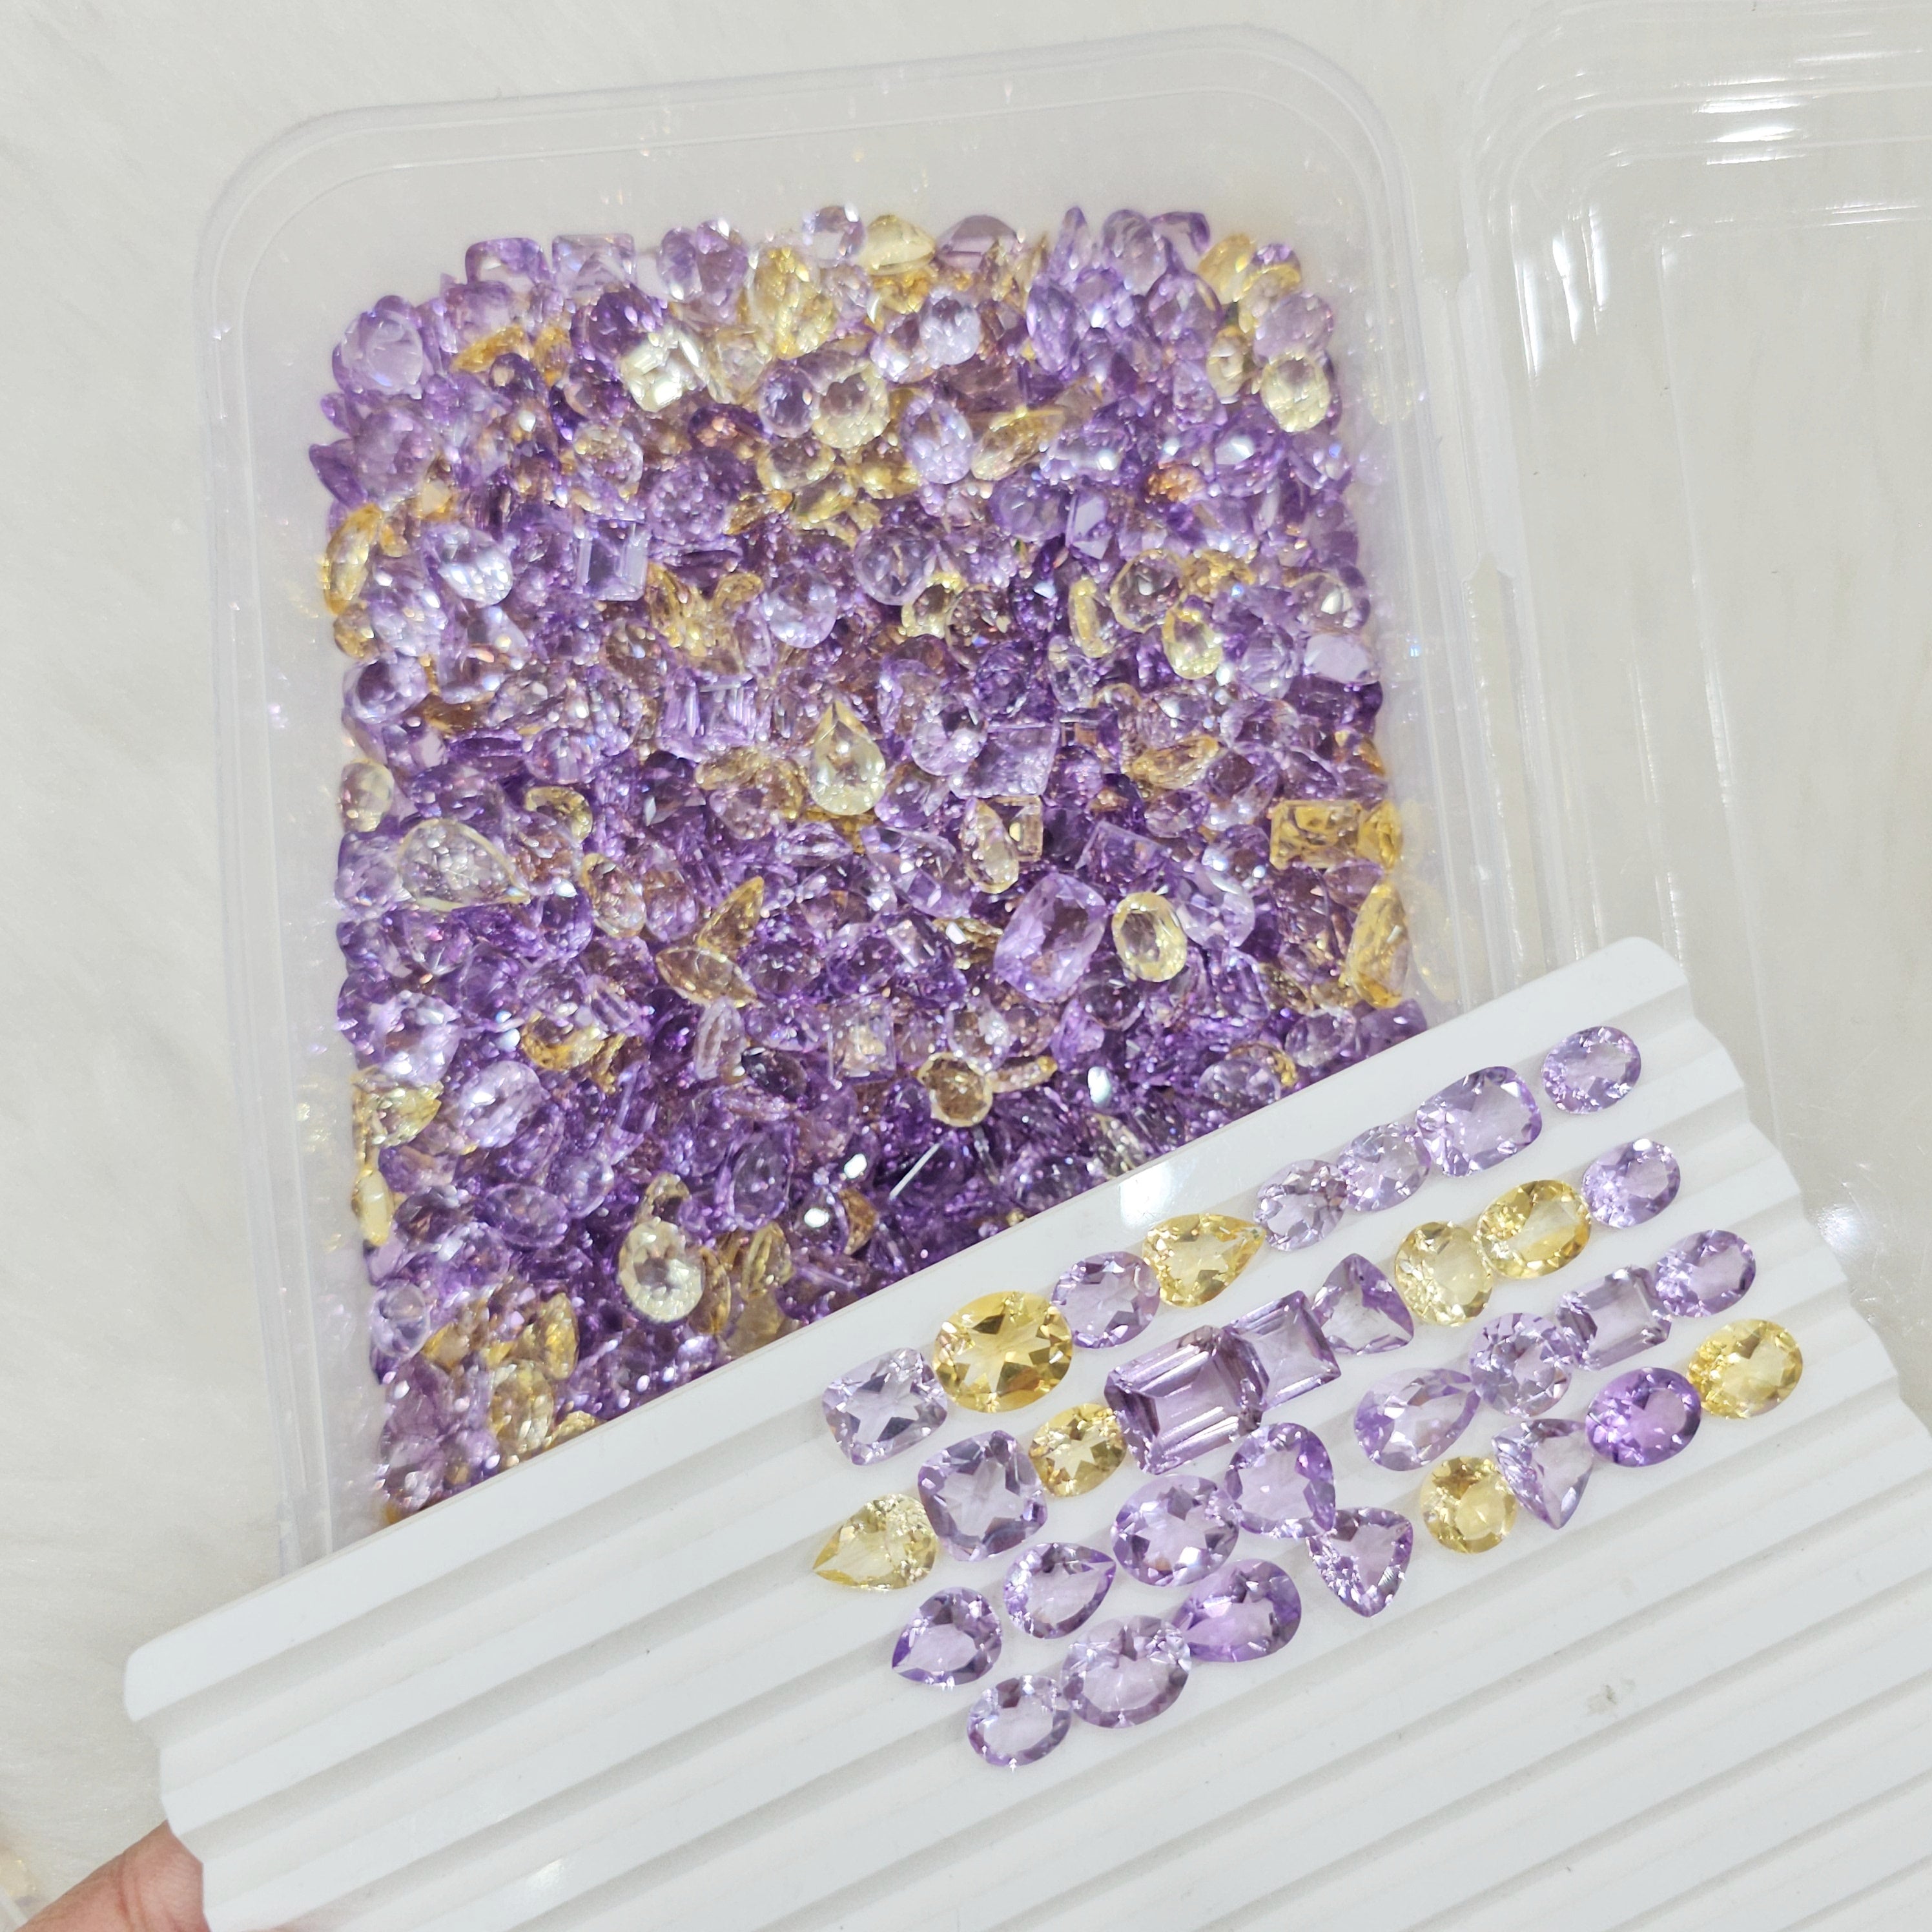 100 Carats Box of Pink Amethyst and Citrines Faceted Gems  | 40 Pcs Approx | - The LabradoriteKing